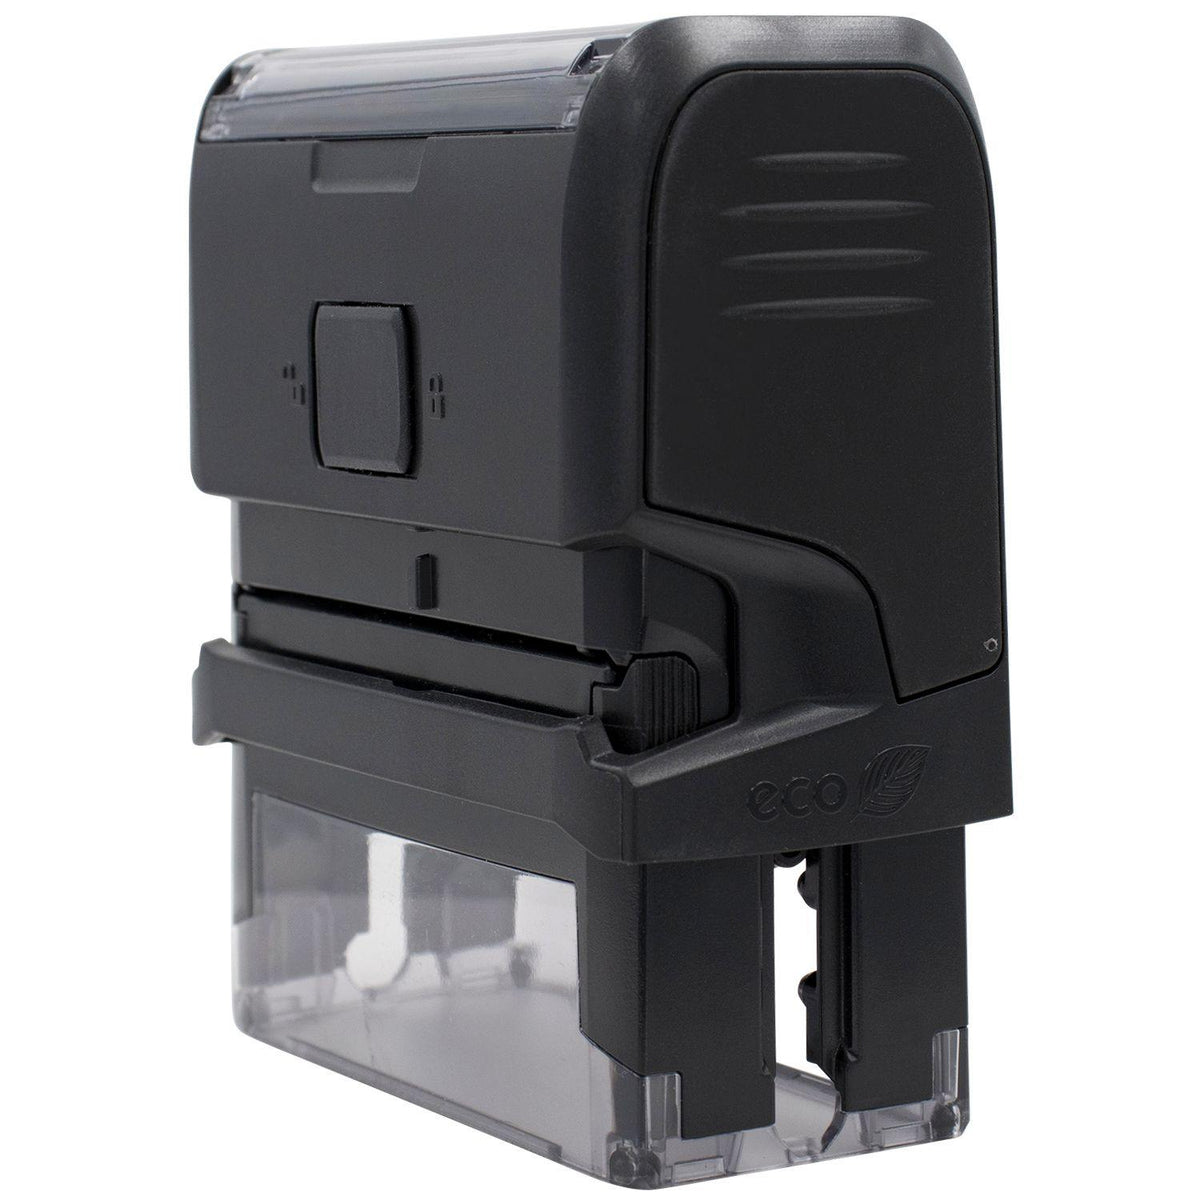 Self Inking Book Stamp - Engineer Seal Stamps - Brand_Trodat, Impression Size_Small, Stamp Type_Self-Inking Stamp, Type of Use_Teacher